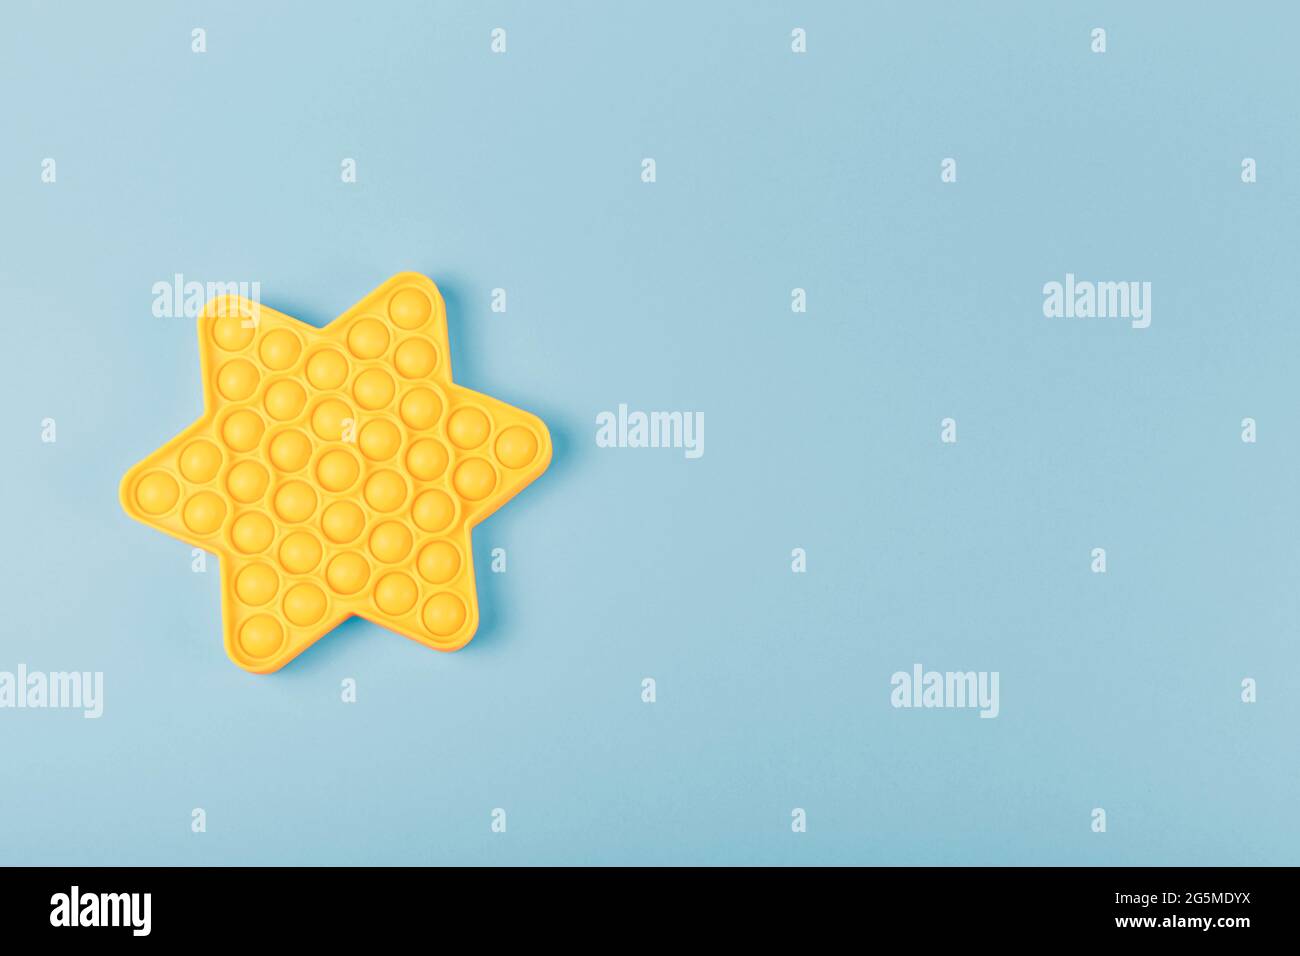 New silcone toy pop it in shape of star on the blue background. New sensory anti-stress toy for children and adult. Copy space. Flat lay. Stock Photo